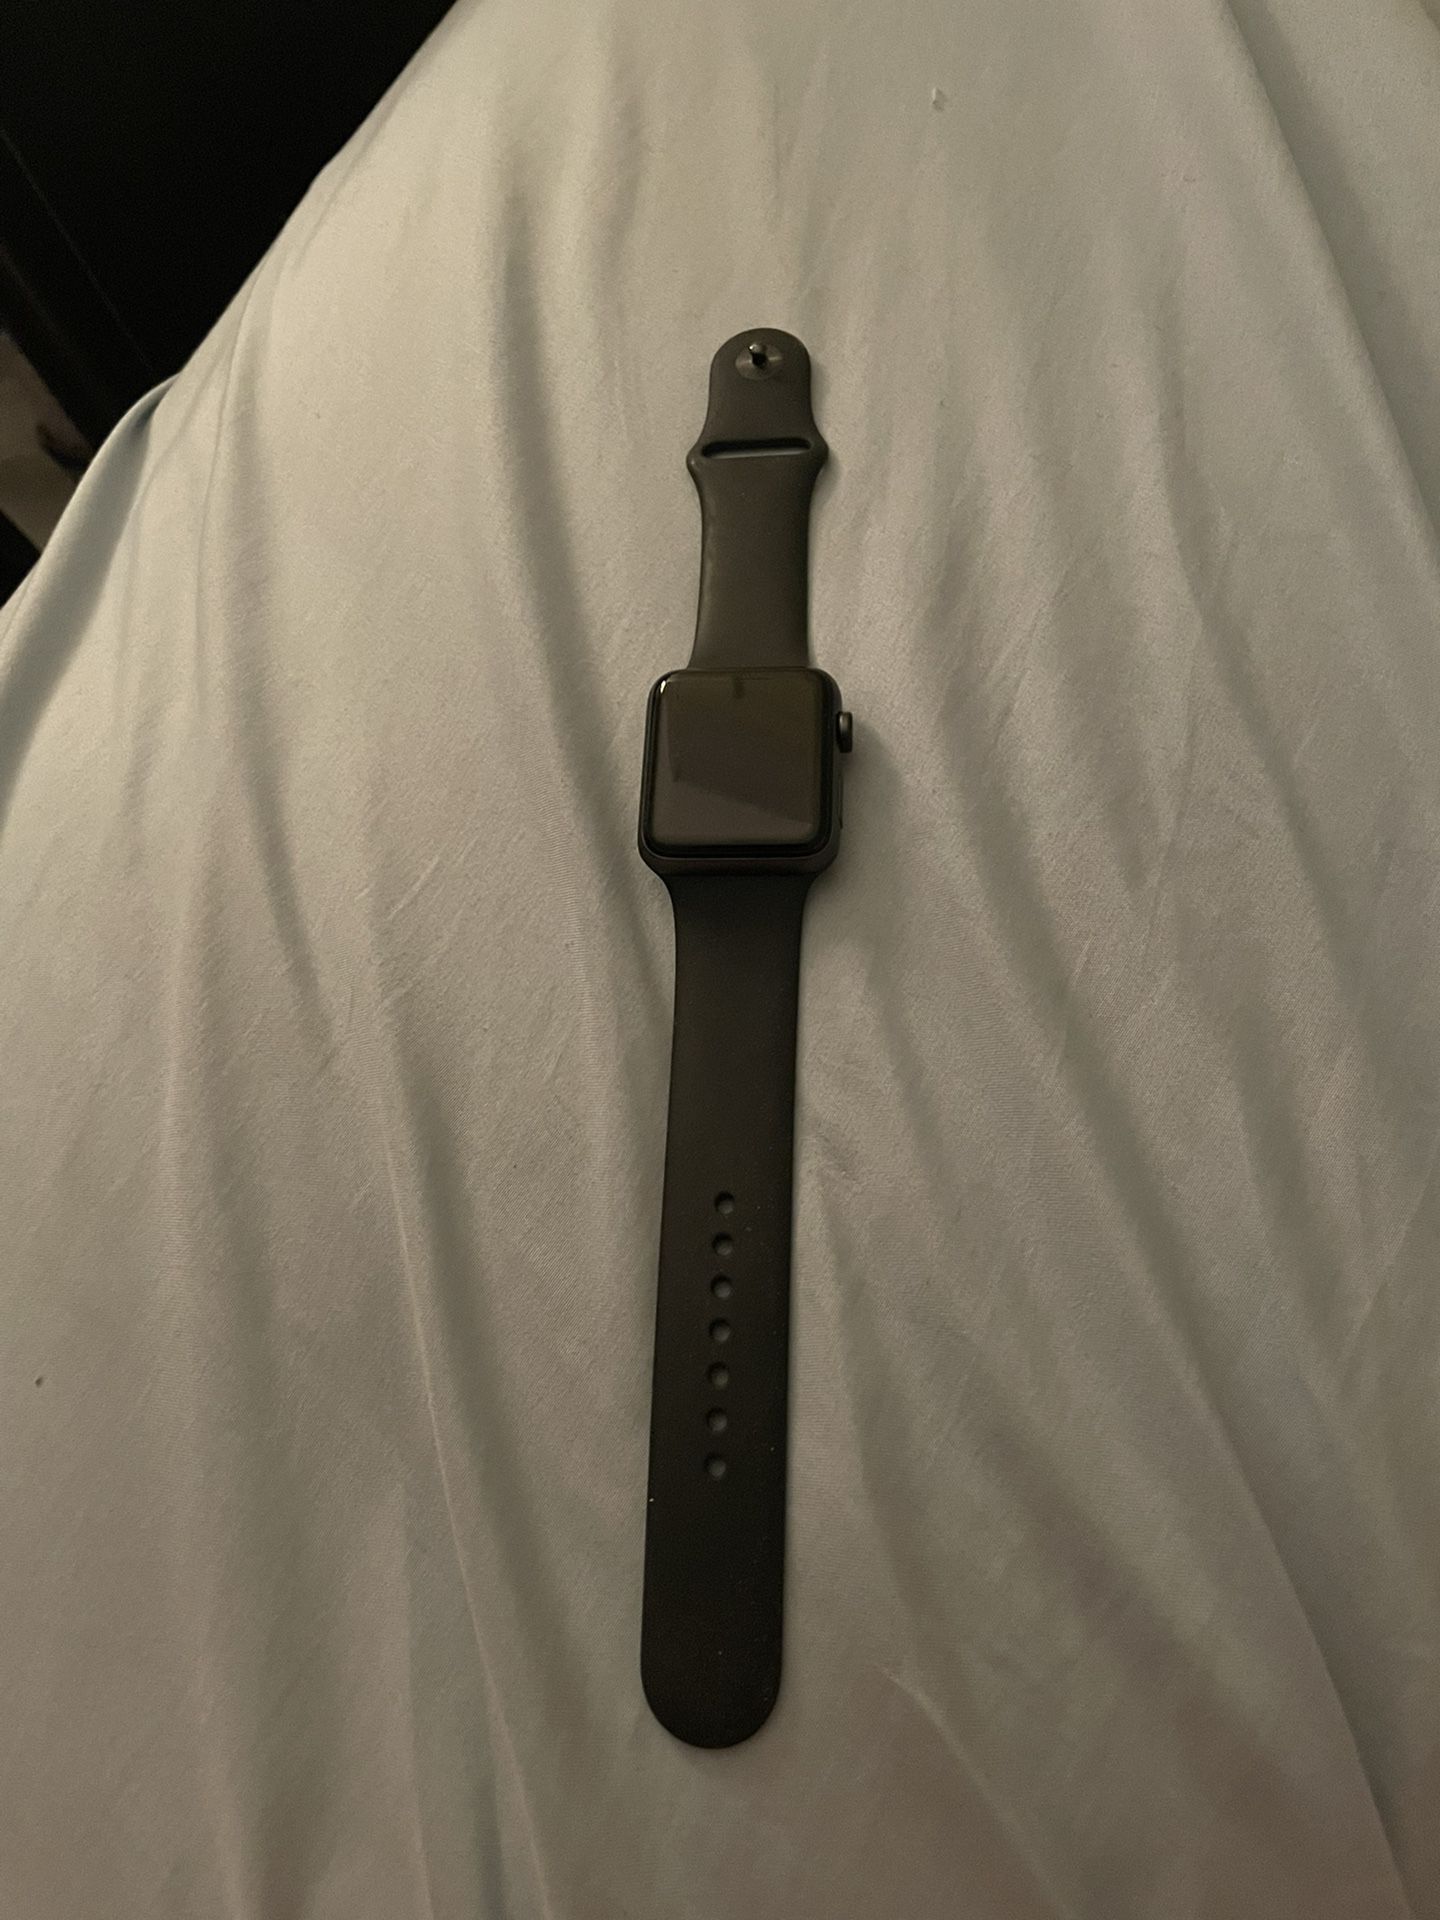 Apple Watch Series 3 Hardly Used